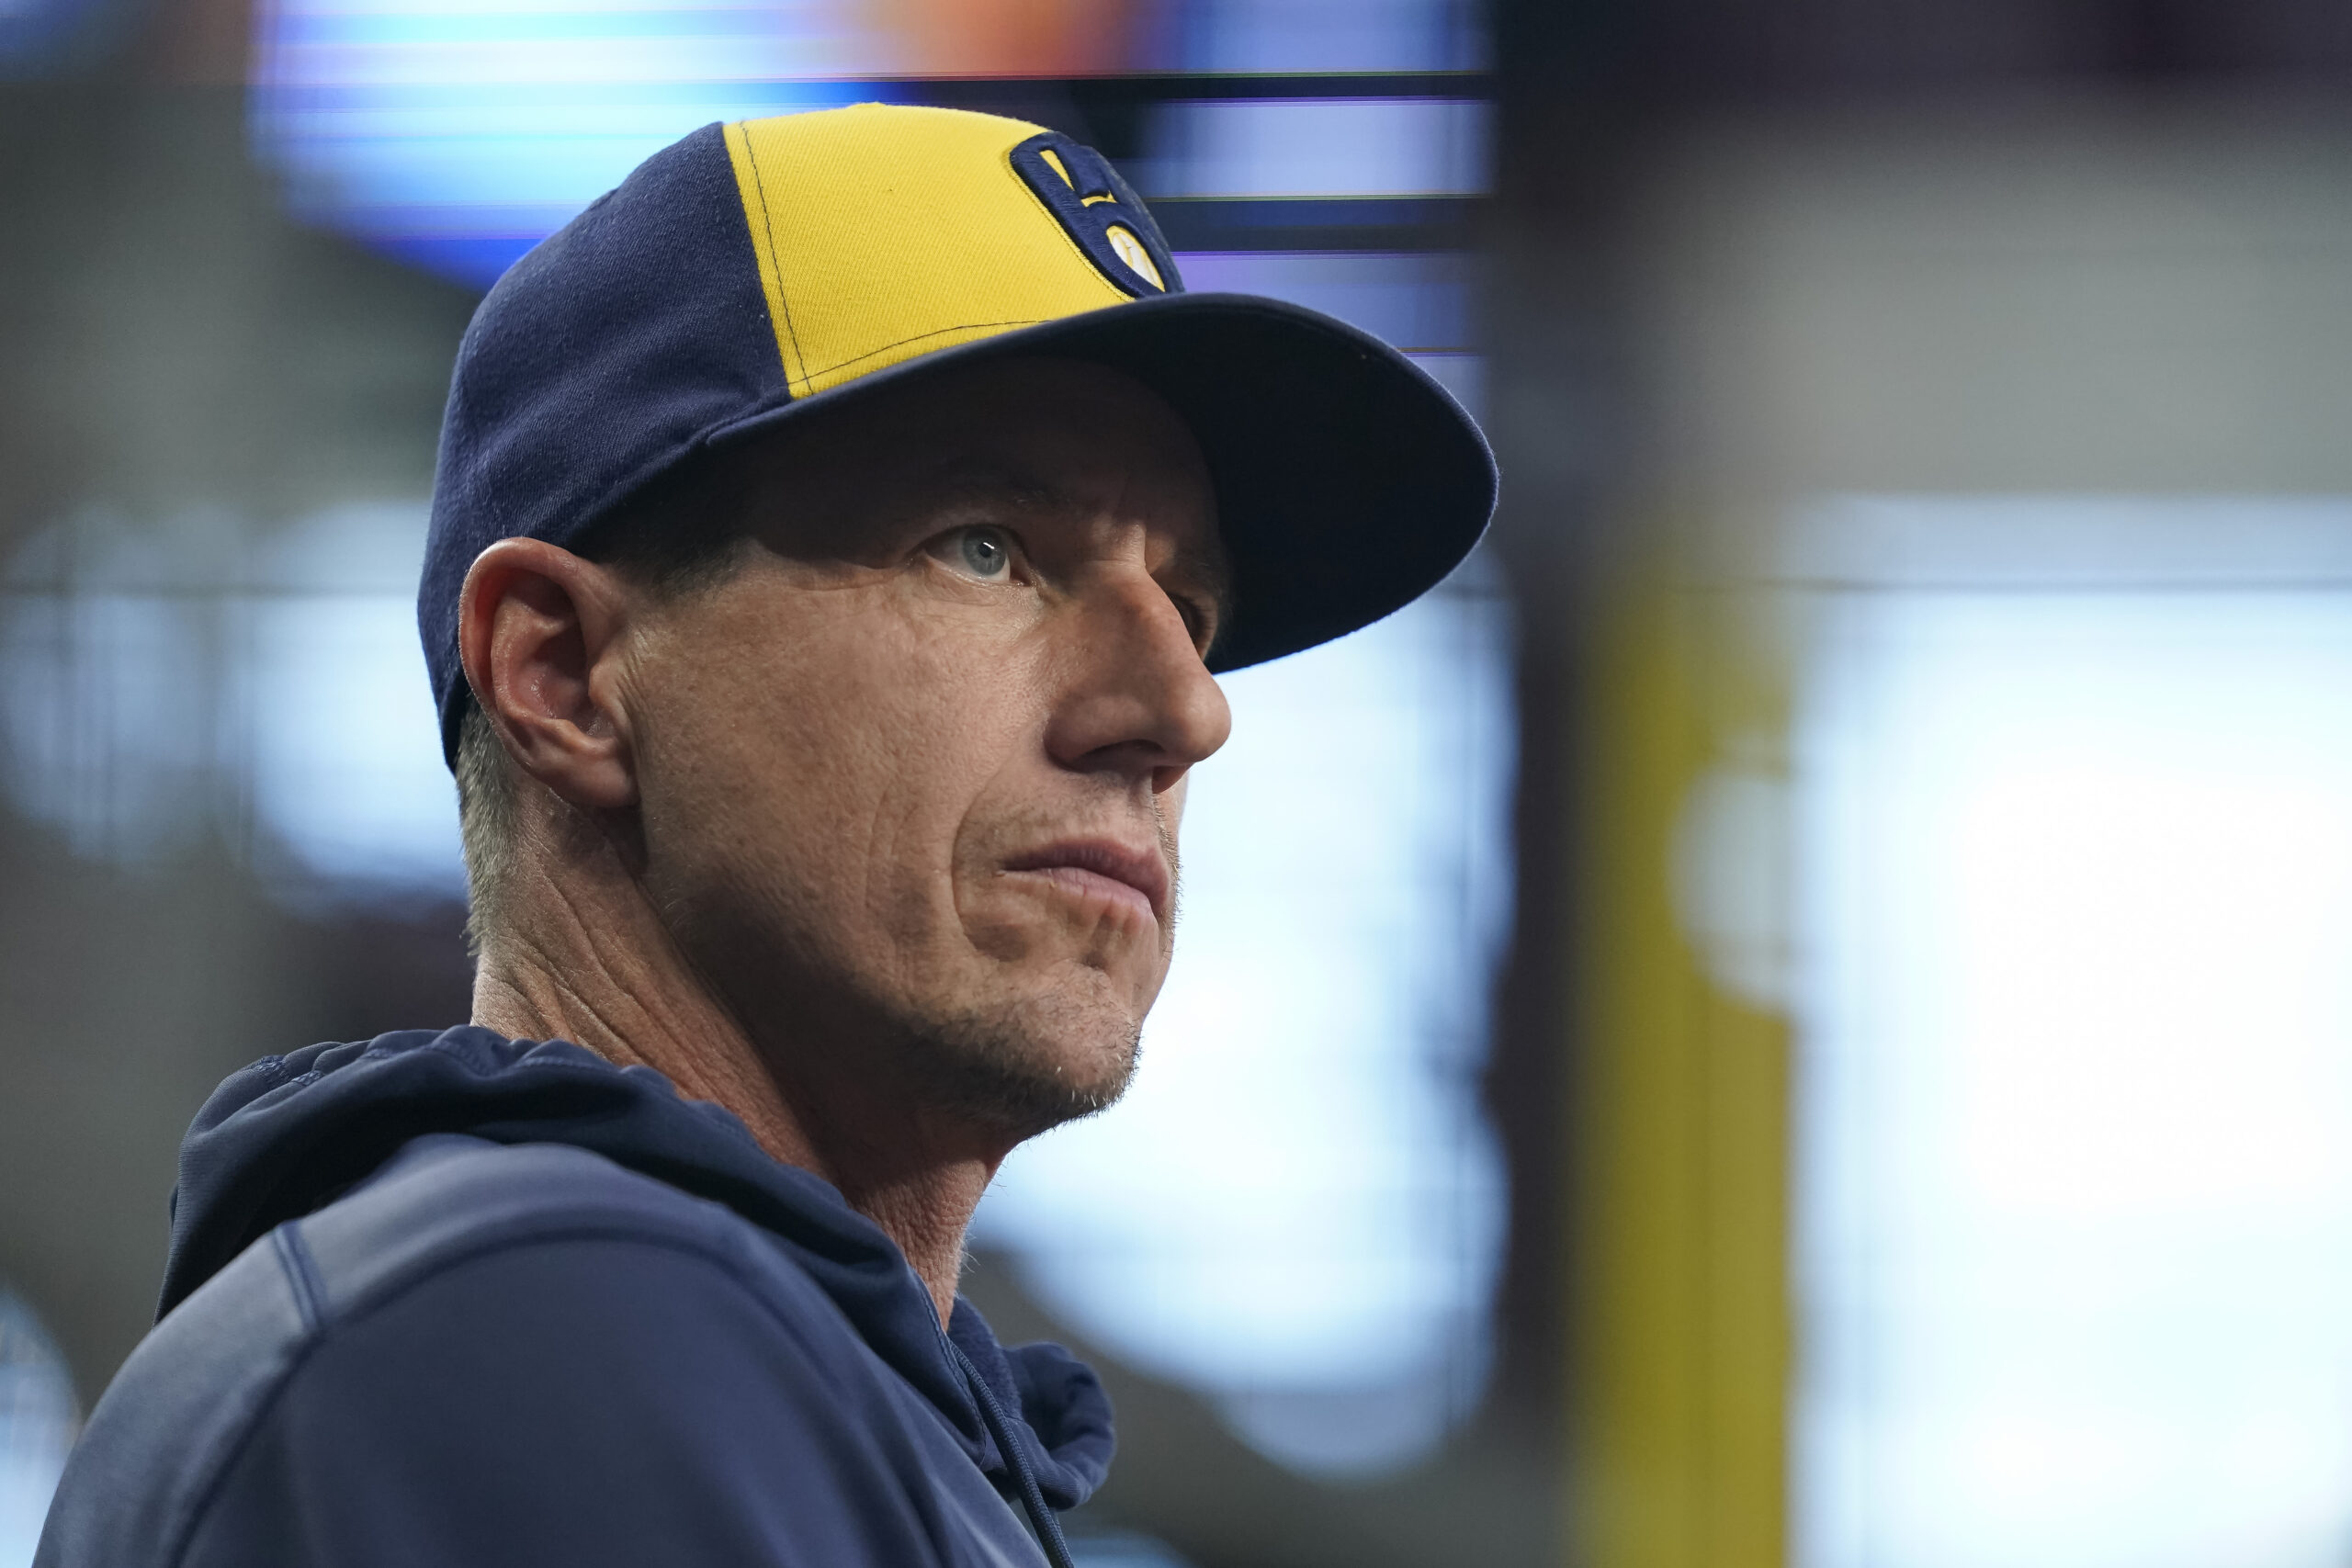 Craig Counsell on heat: Wednesday will be a 'rough day' - WTMJ